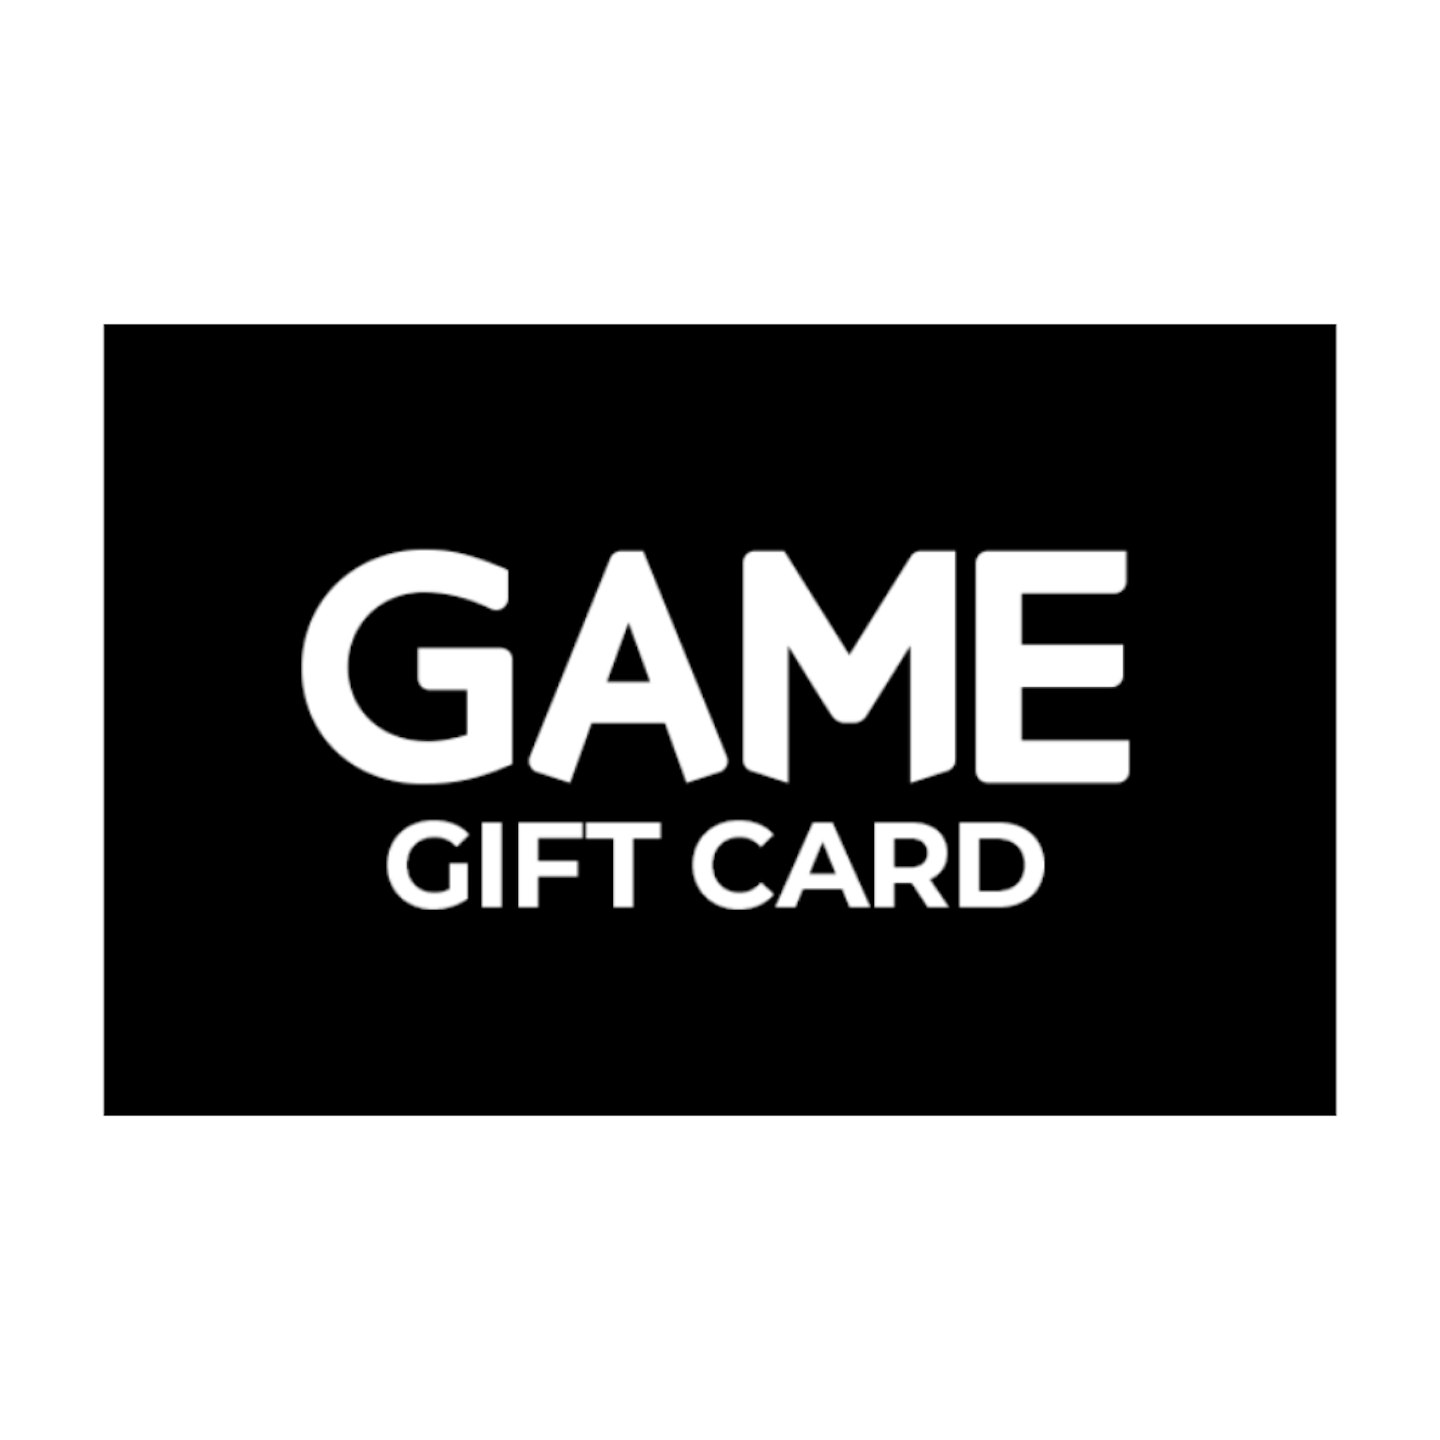 GAME Gift Card